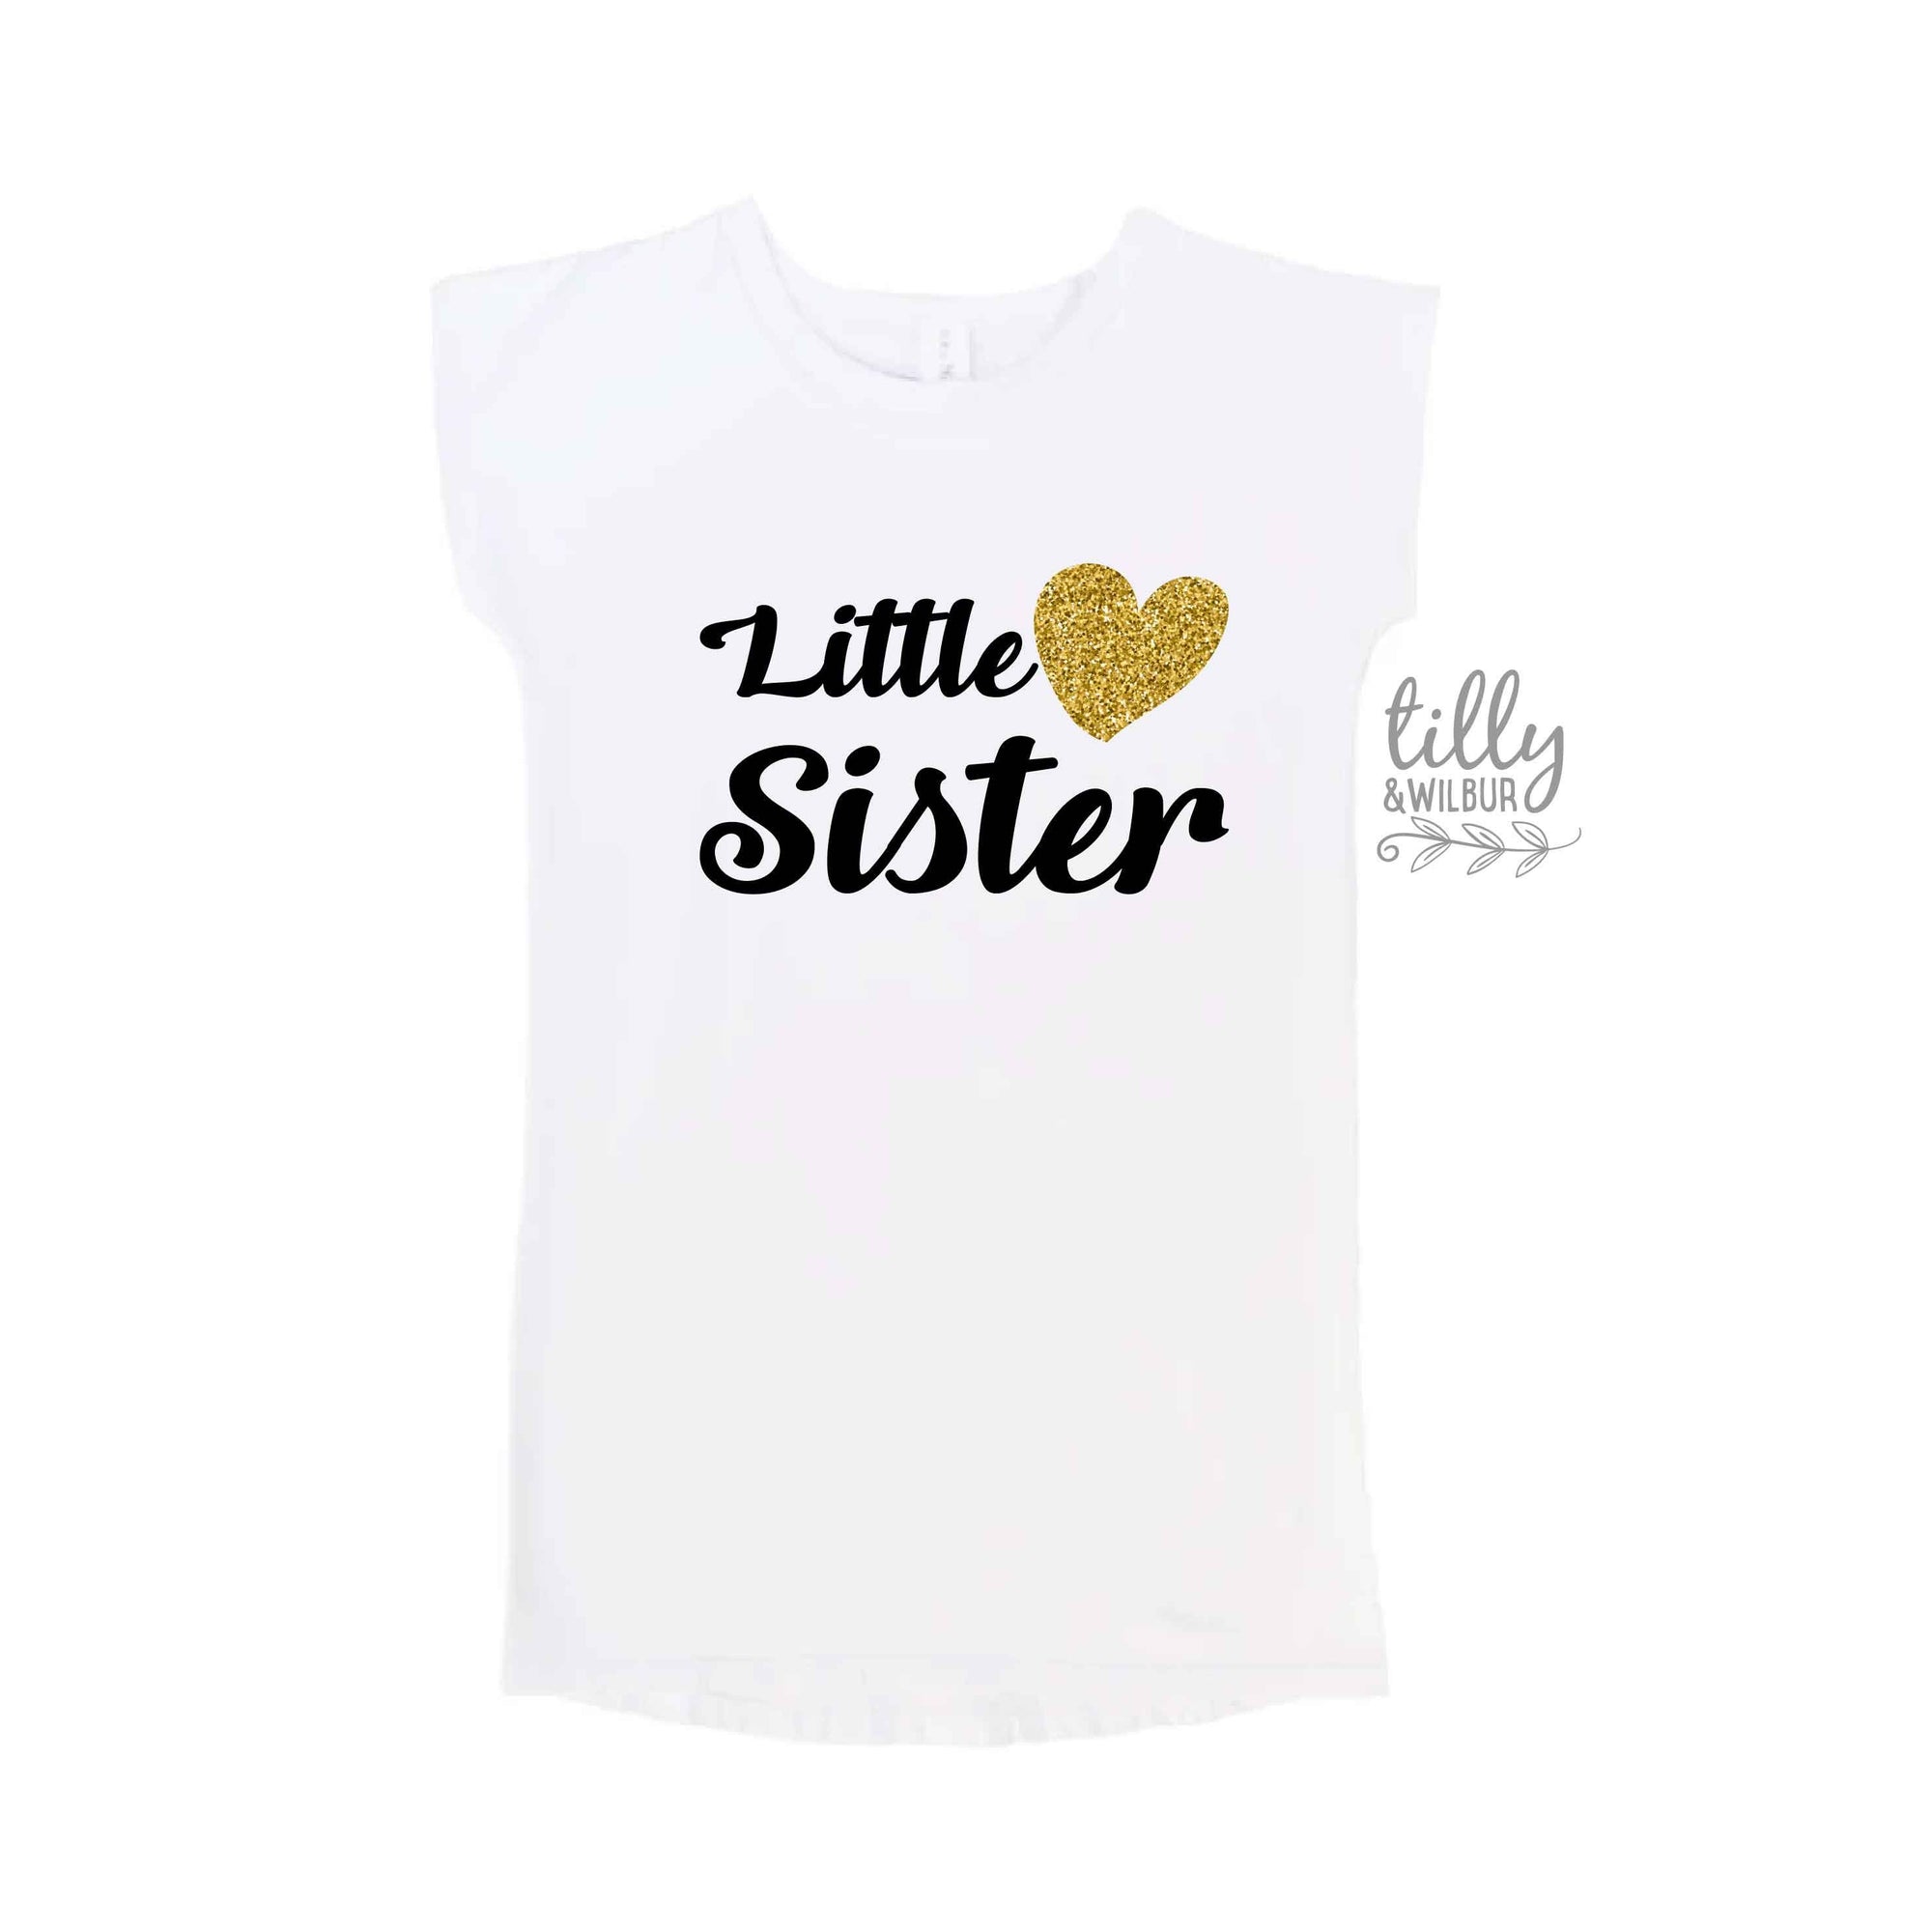 Little Sister T-Shirt Dress, Pregnancy Announcement T-Shirt, I&#39;m Going To Be A Big Sister, Matching Sister T-Shirt Gift, Little Sister Shirt